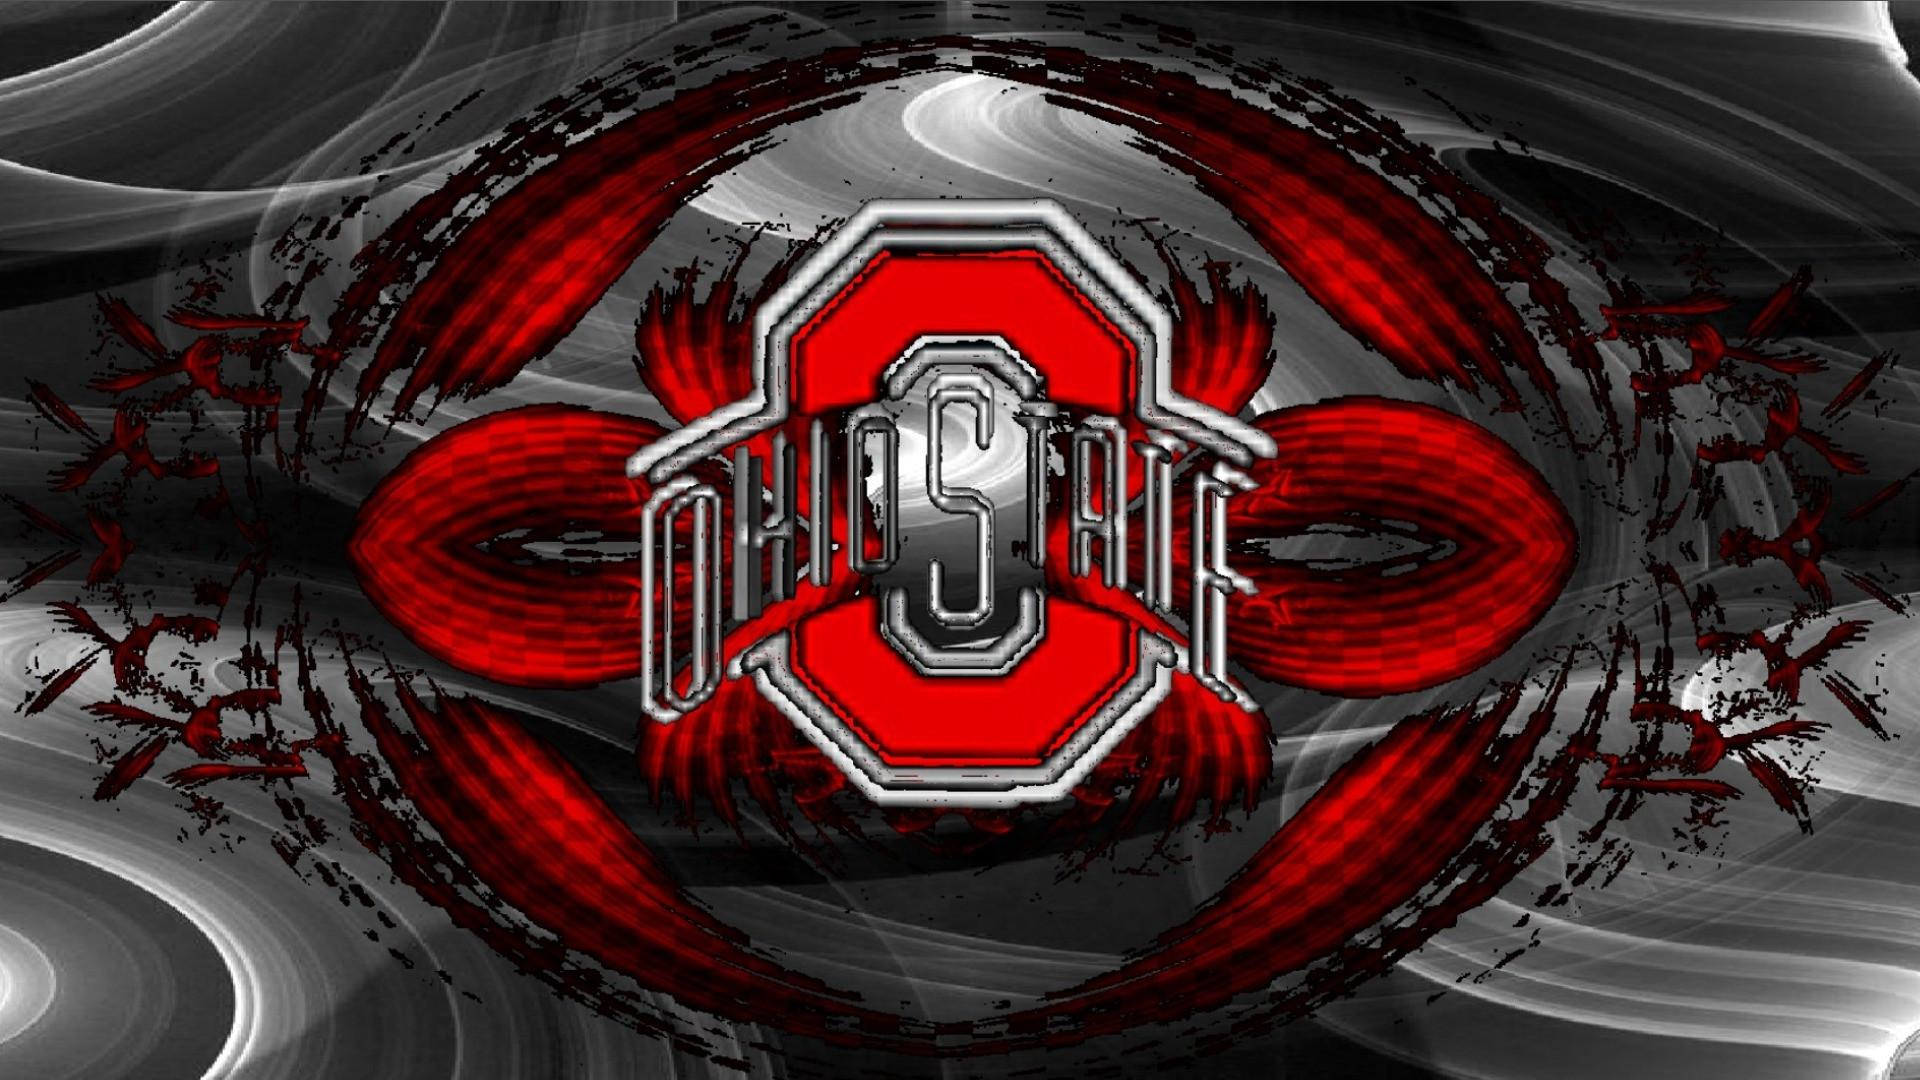 Ohio State 1920X1080 Wallpaper and Background Image